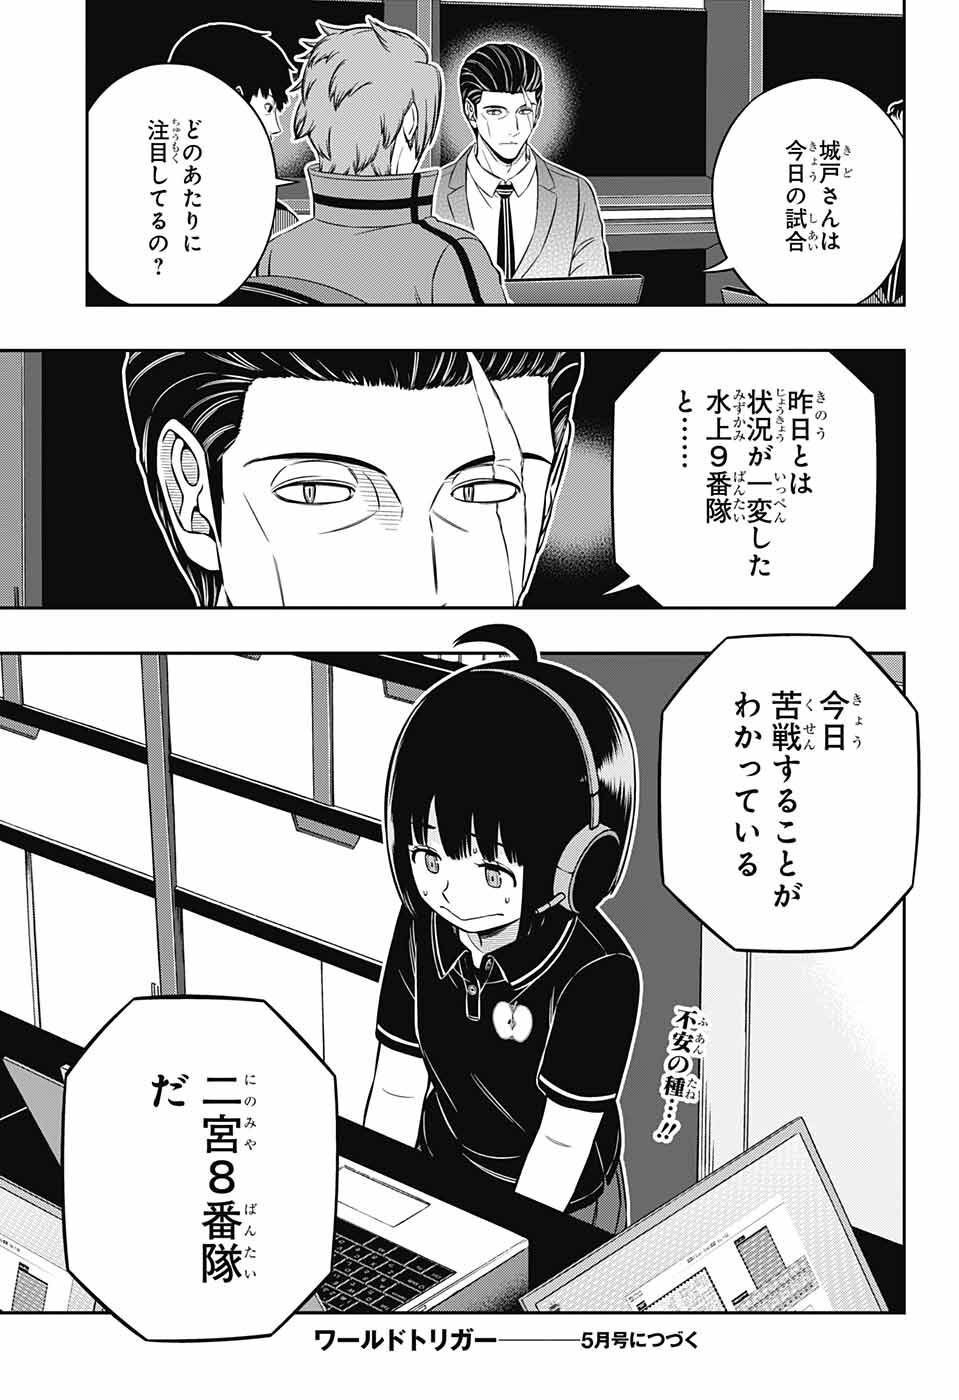 World Trigger - Chapter 231 - Page 23